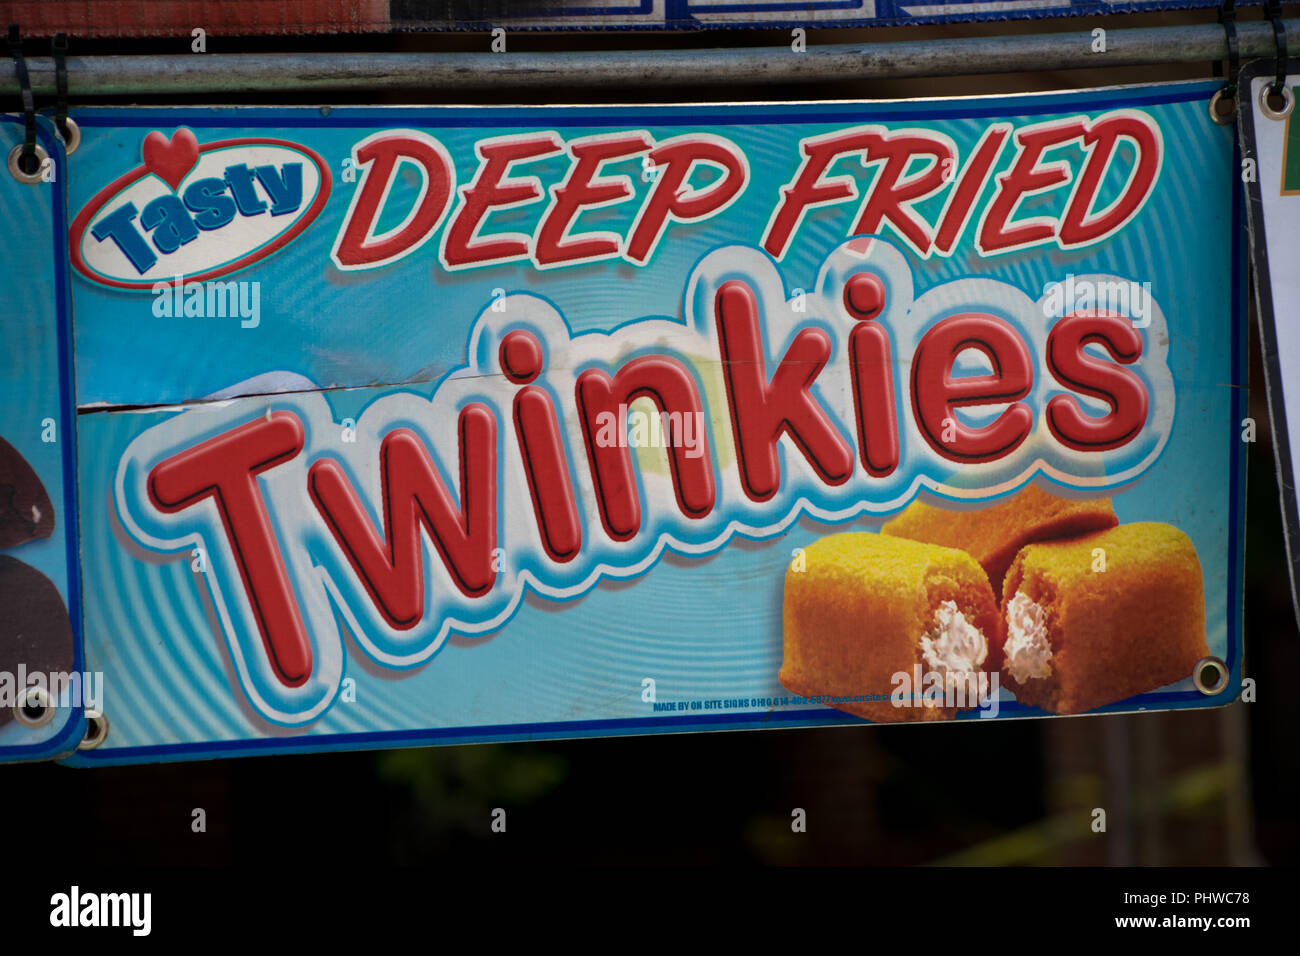 Deep fried Twinkie sign at a vendor at a Labor Day festival in Matthews, North Carolina USA Stock Photo